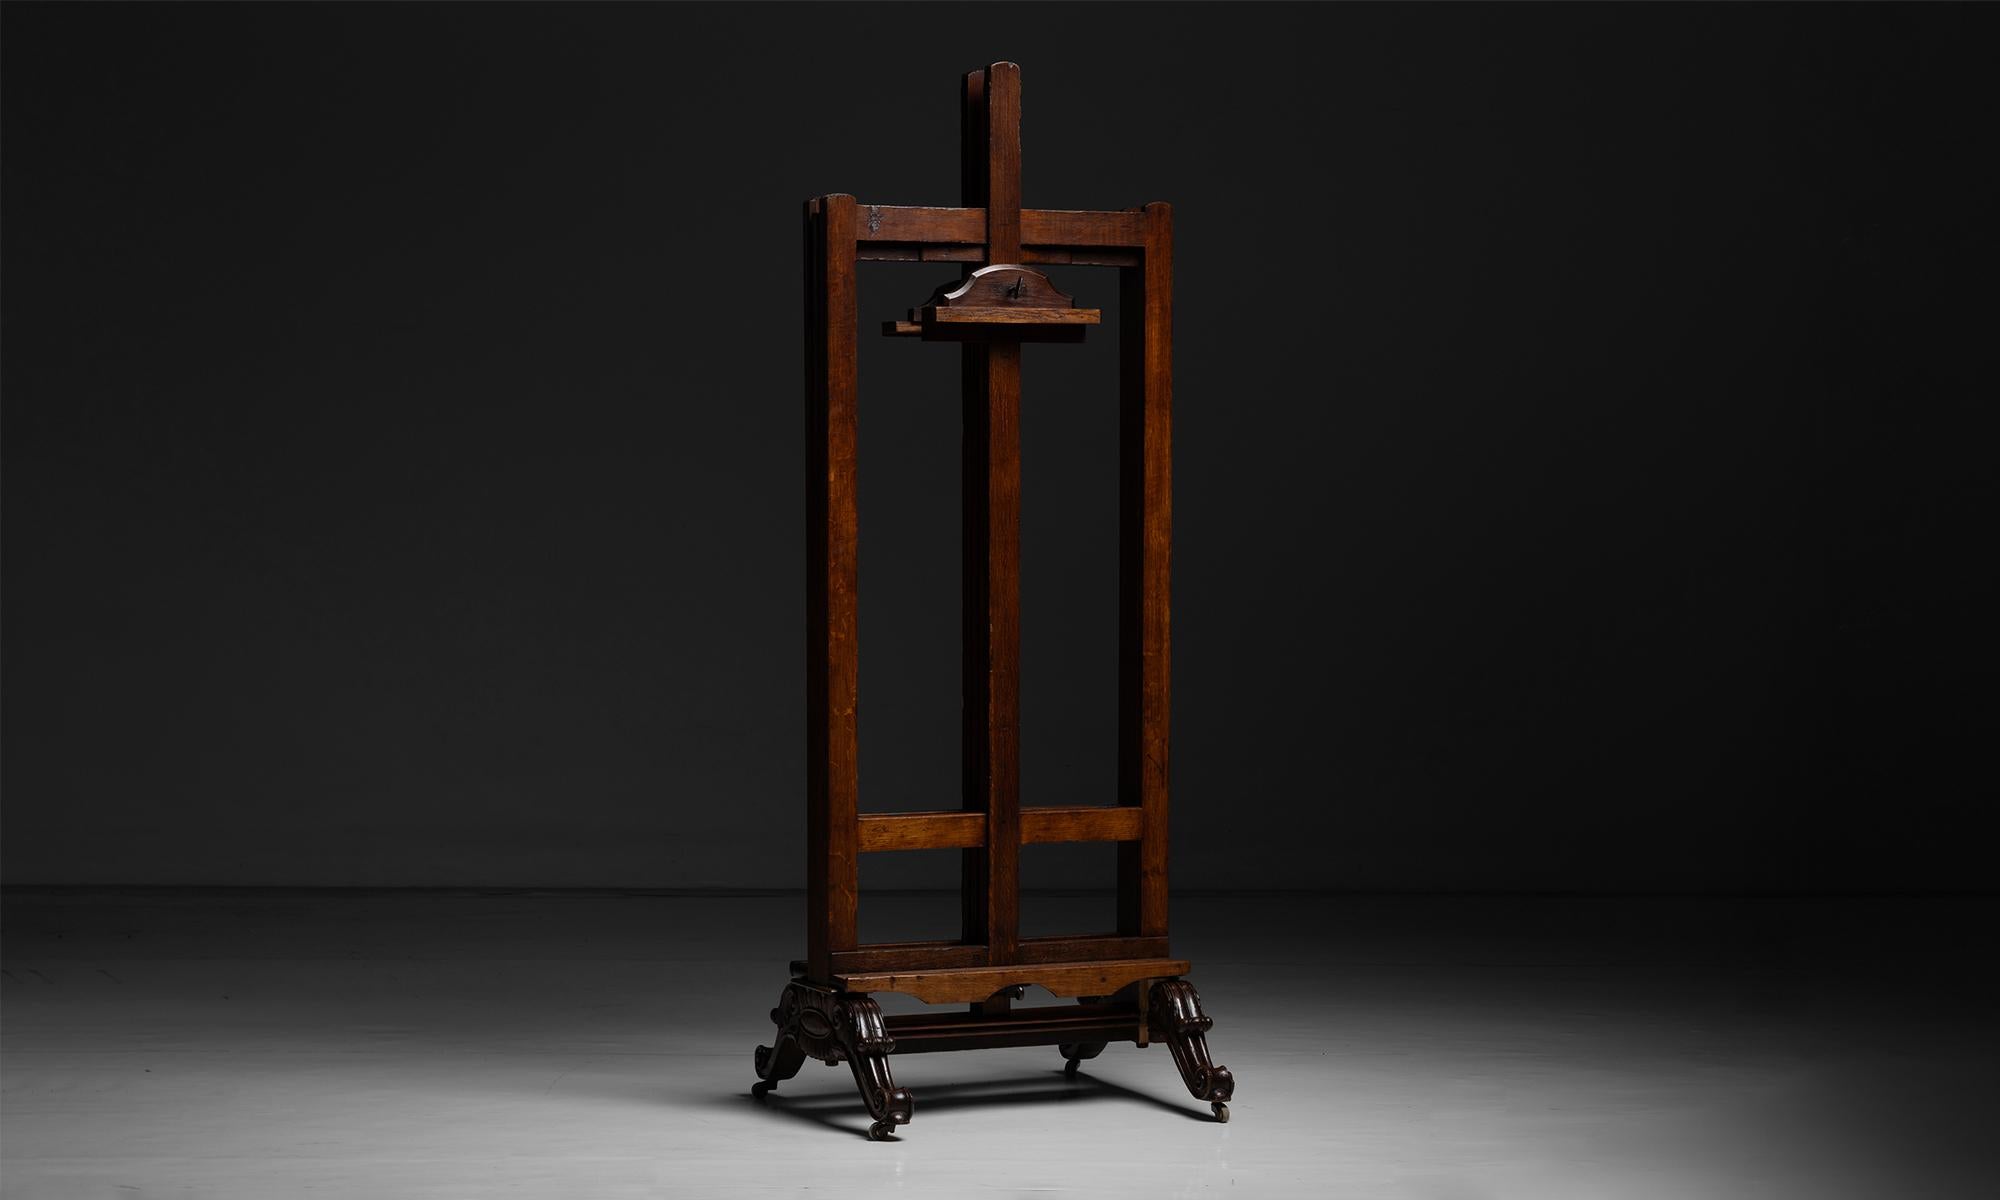 Double Sided Easel

Netherlands circa 1890

Easel on wheels with adjustable height.

30.5”w x 29.5”d x 93”h